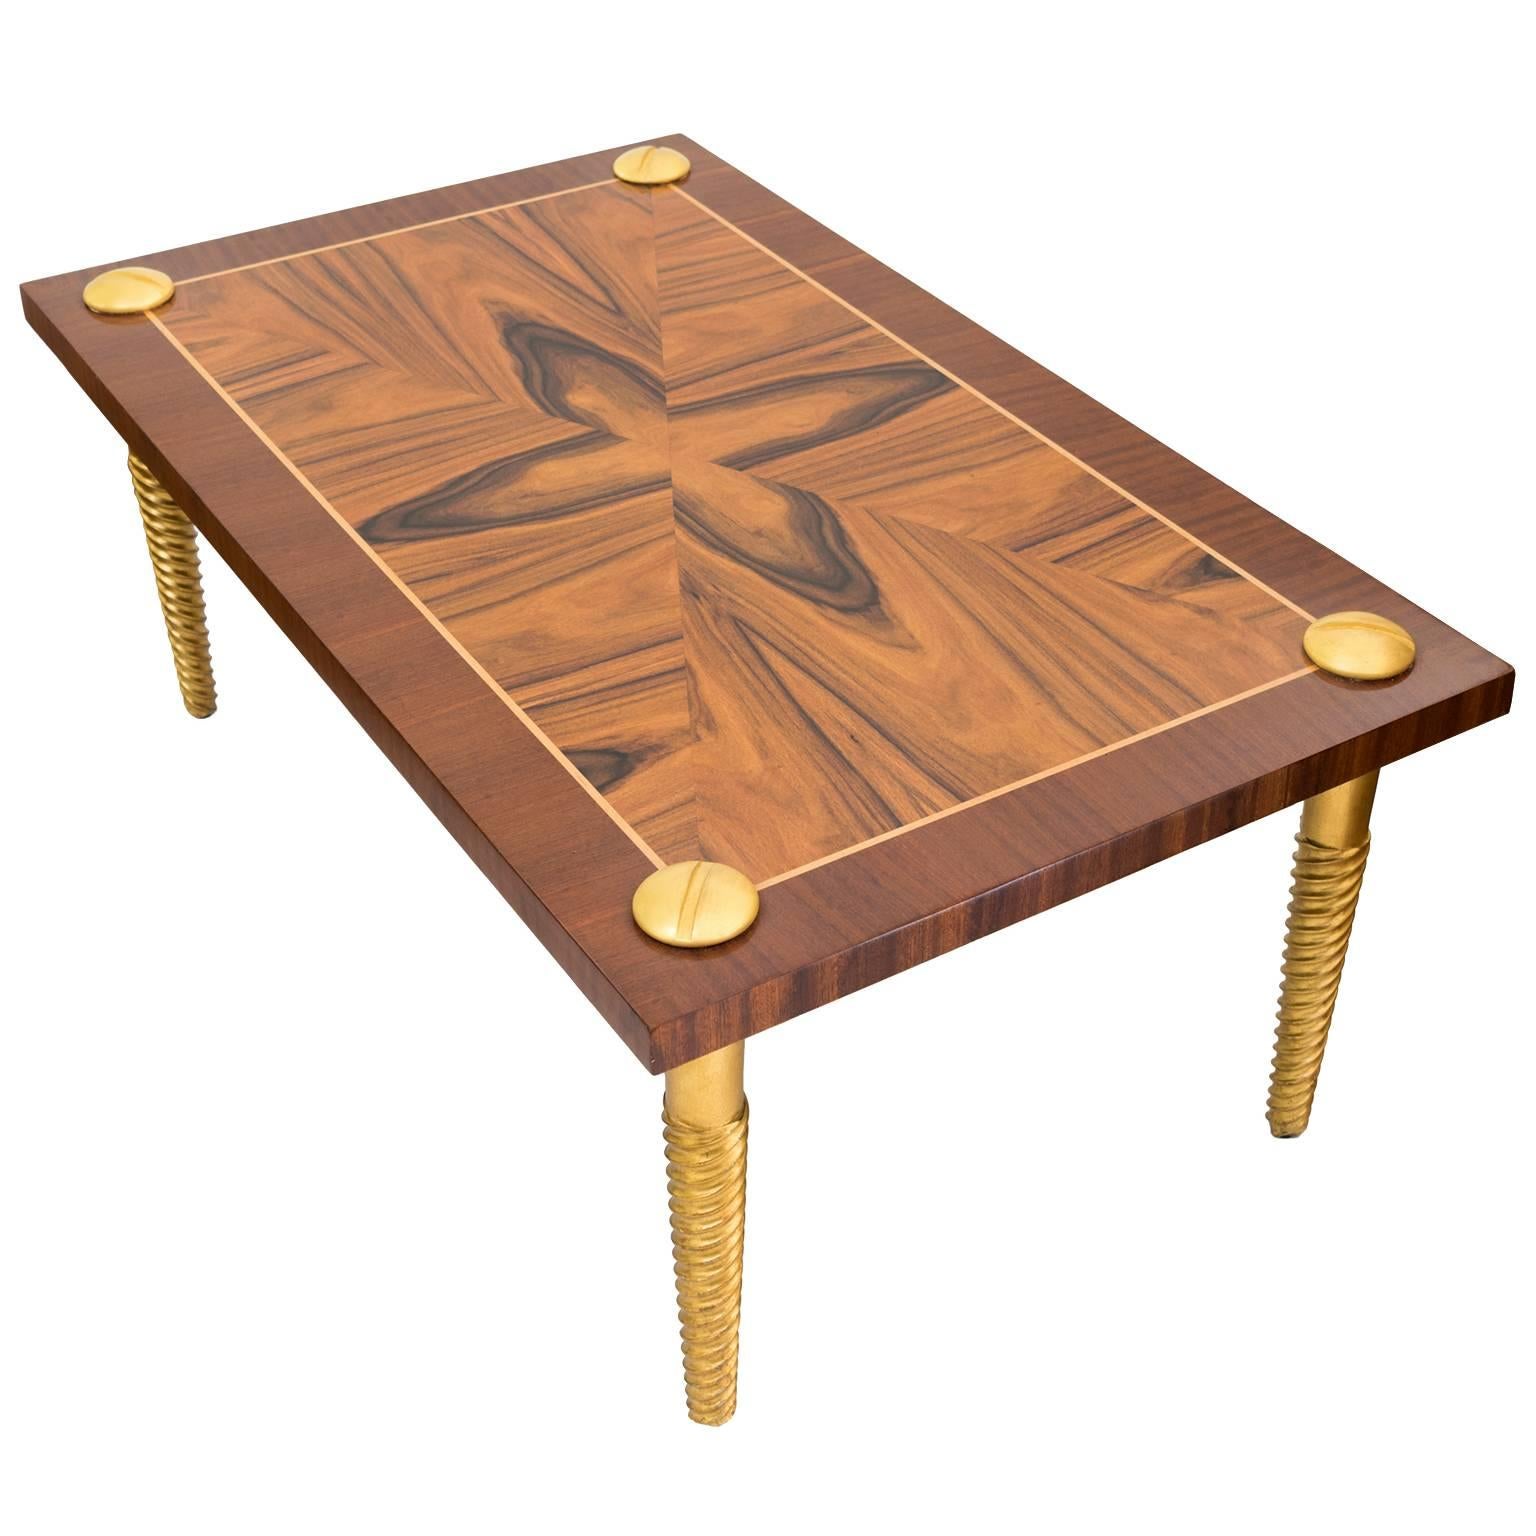 Midcentury Modern Marquetry Coffee Table with Giltwood "Screw" Legs